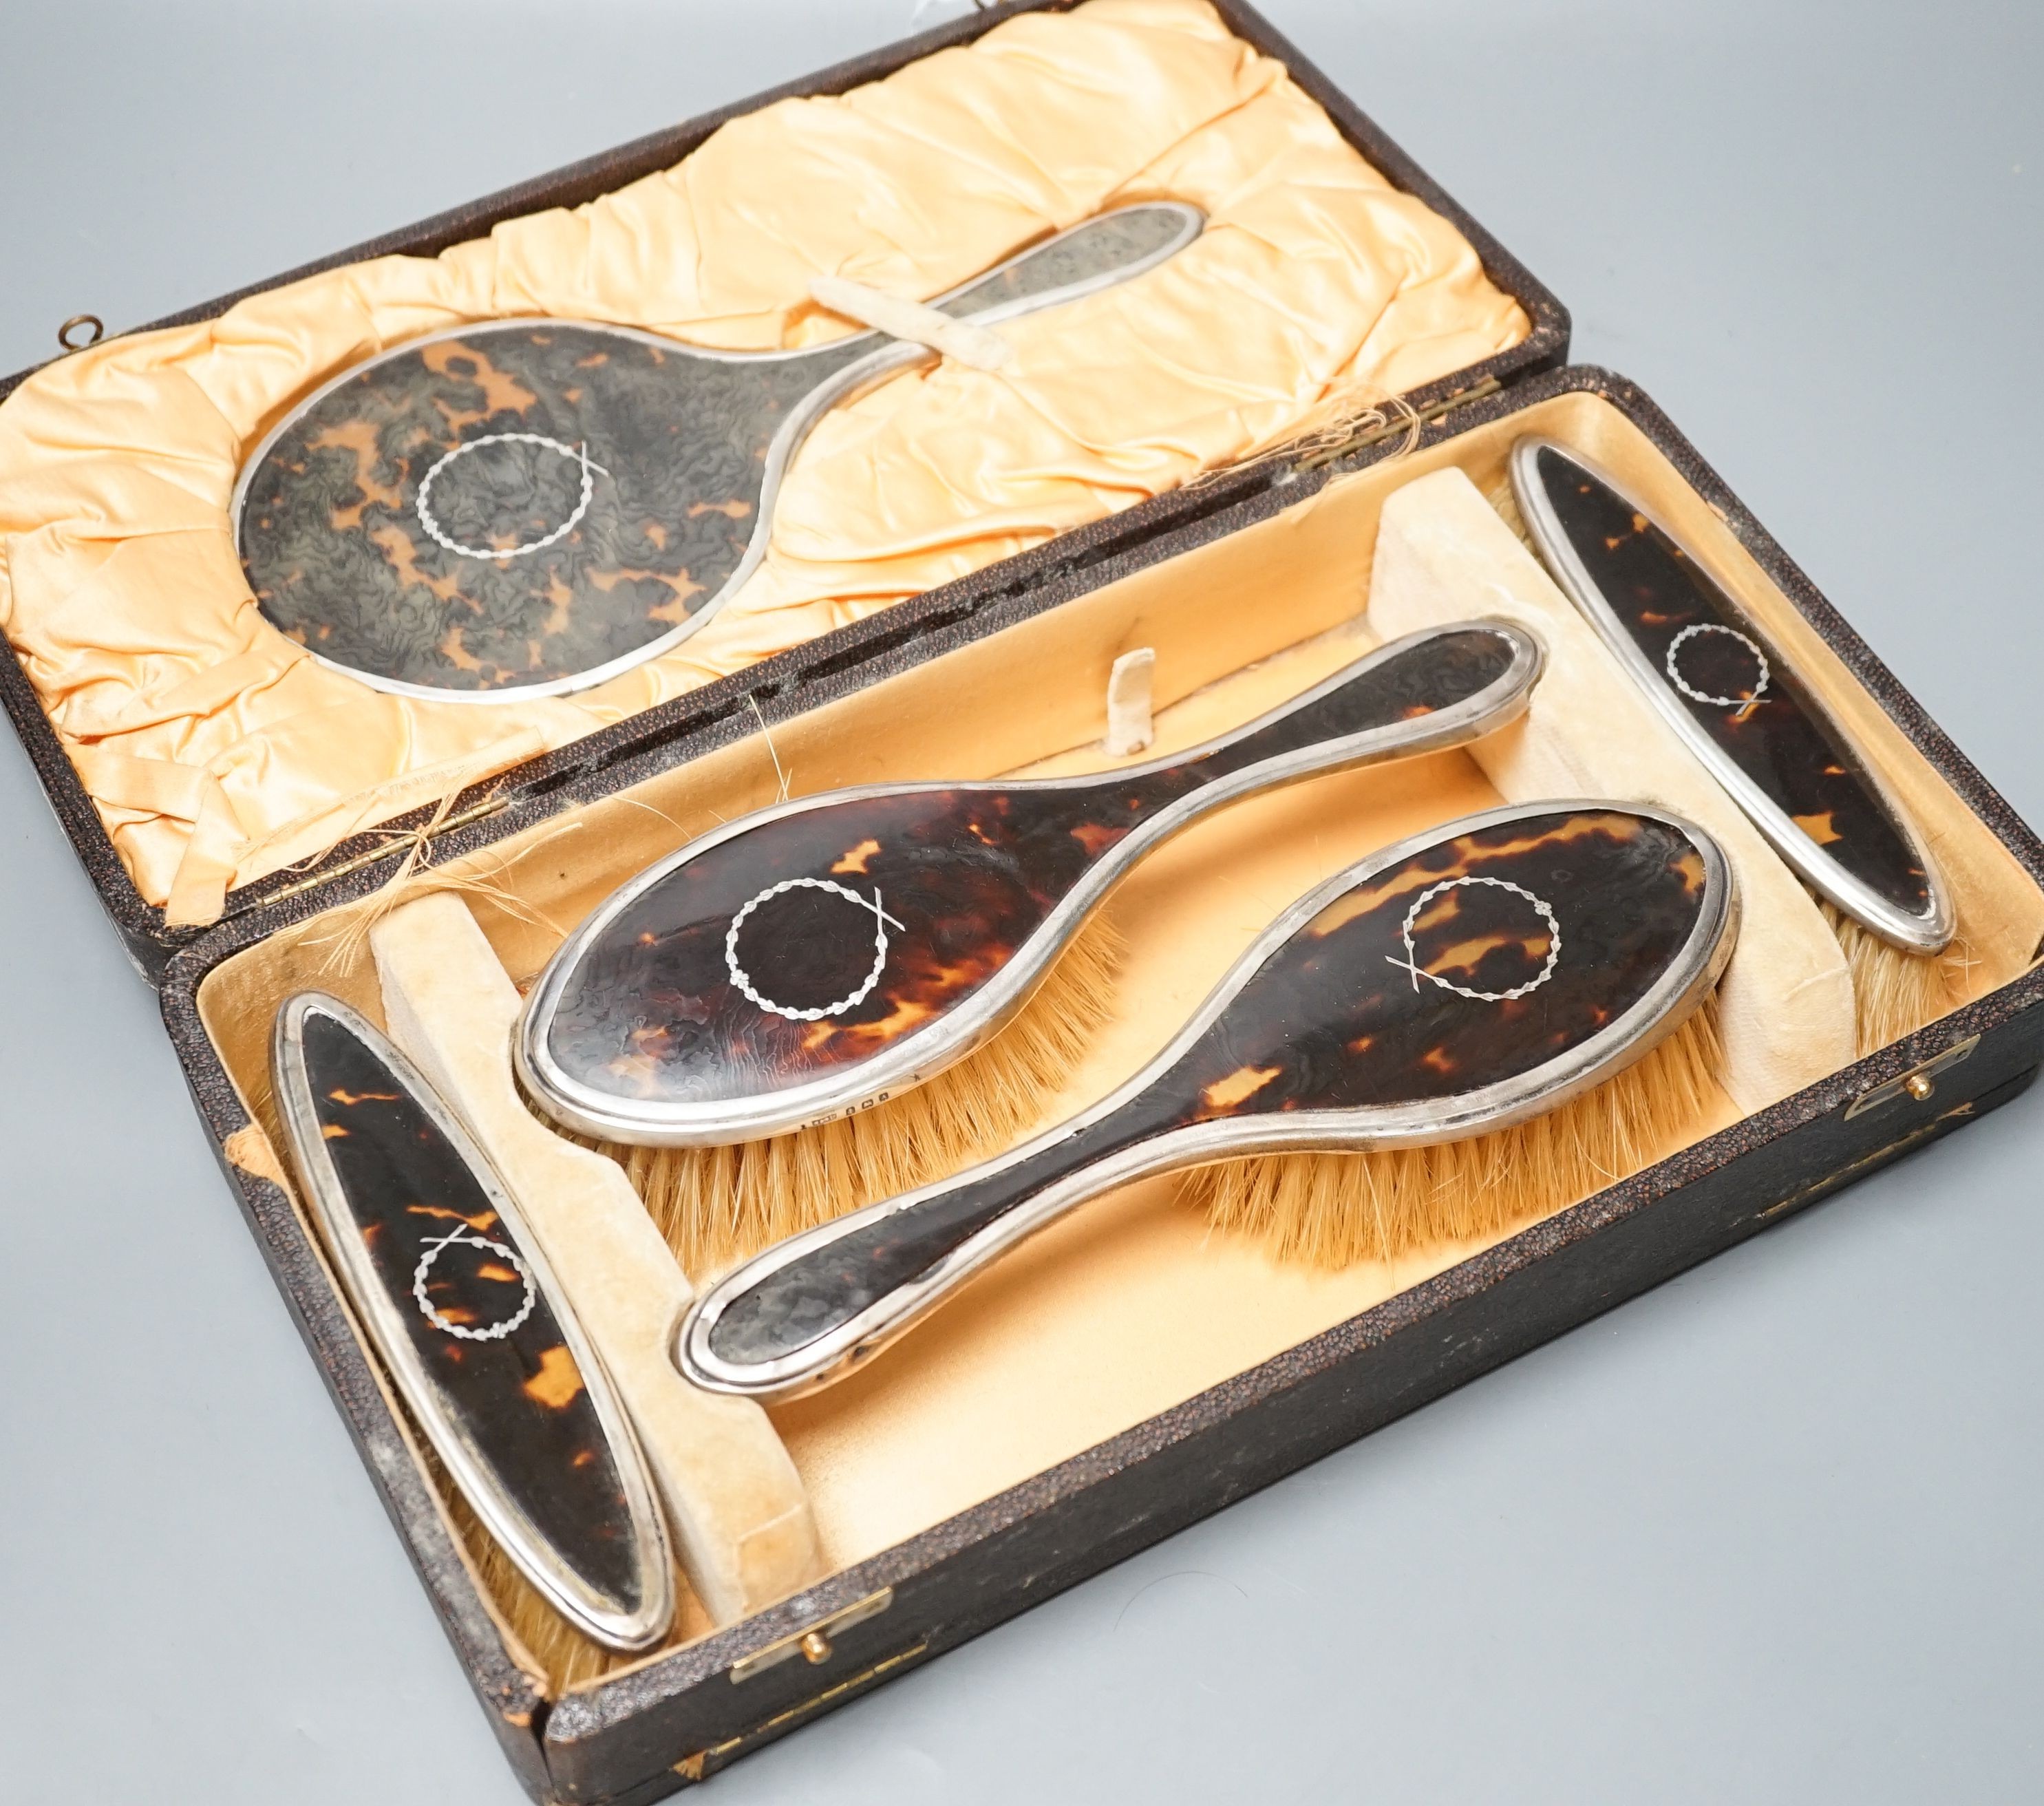 A 1920's cased tortoiseshell and silver mounted mirror and brush set.